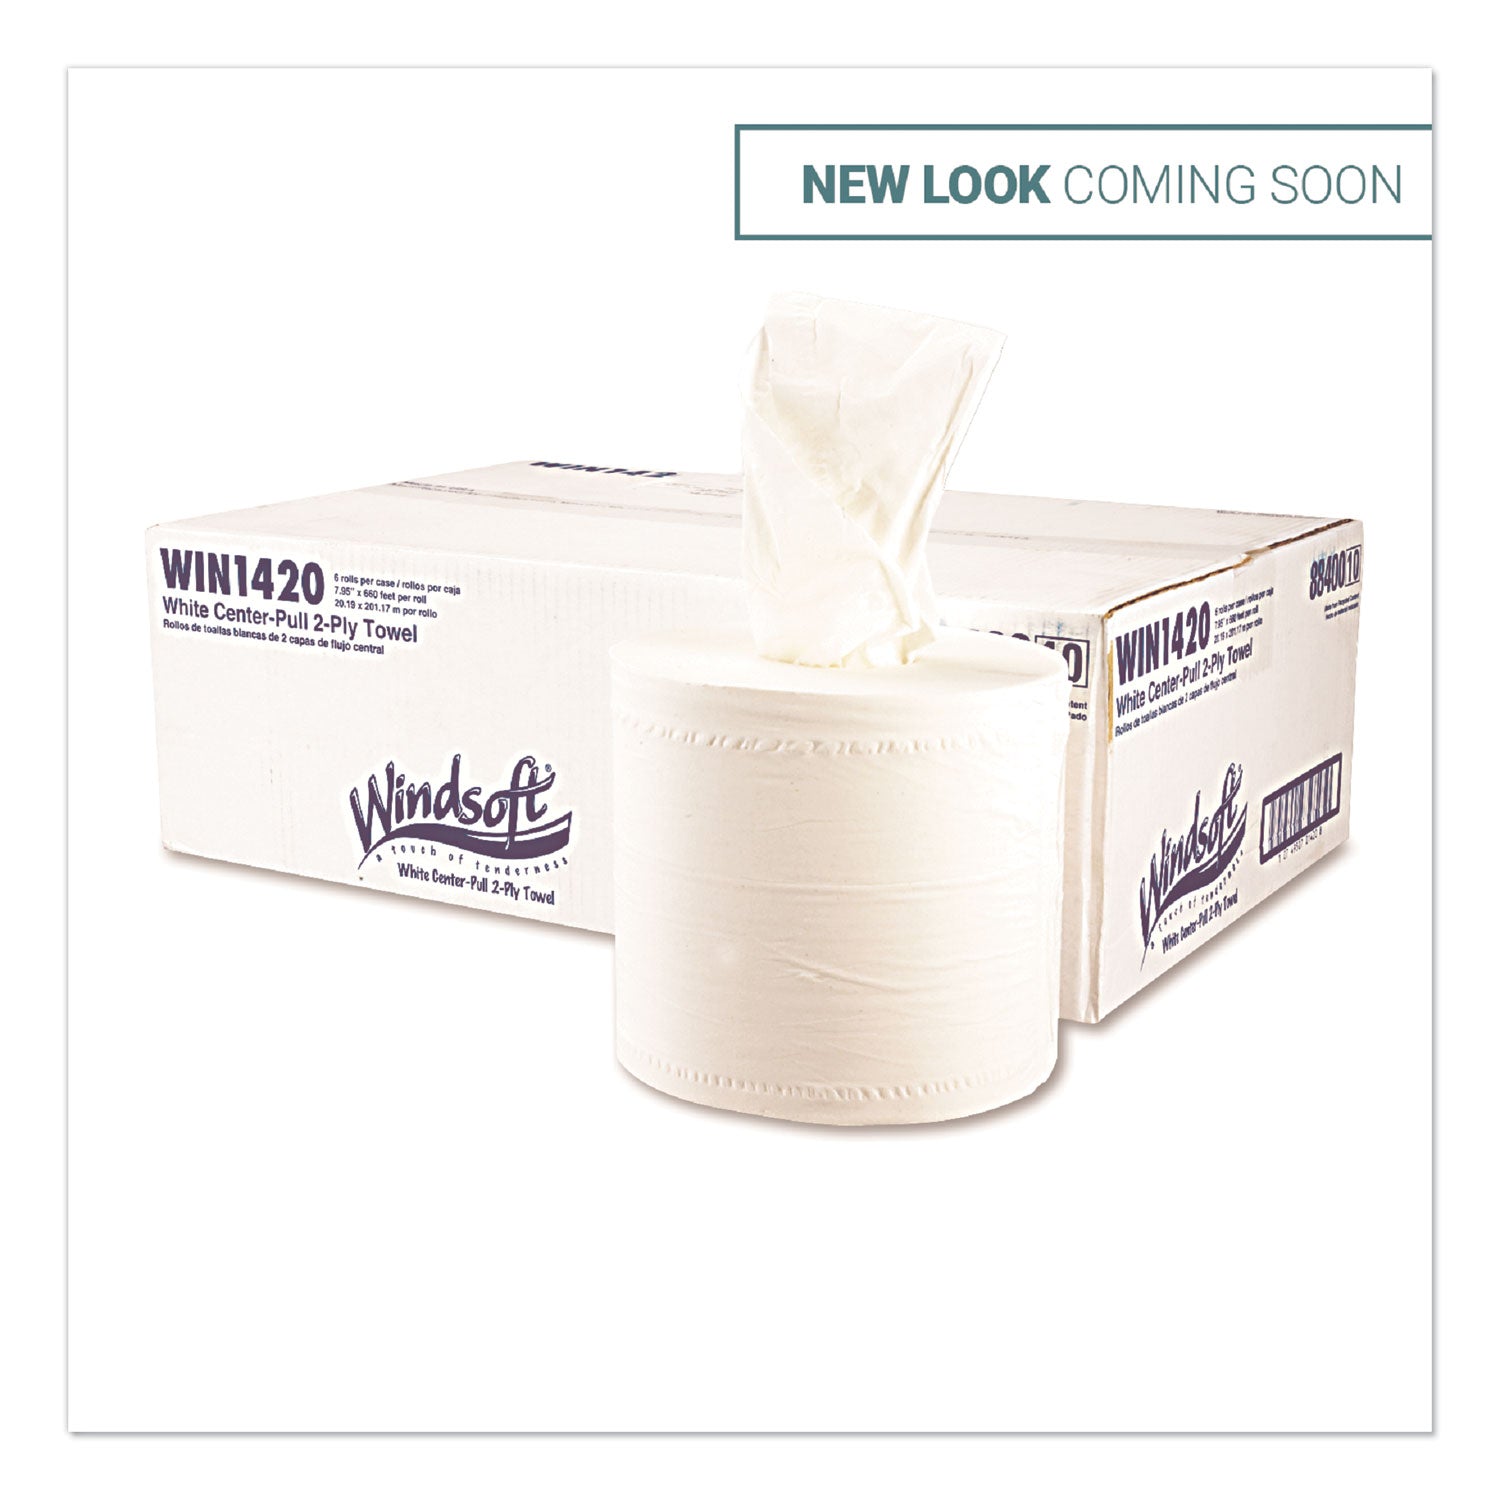 center-flow-perforated-paper-towel-roll-73-x-15-white-6-rolls-carton_win1420b - 3